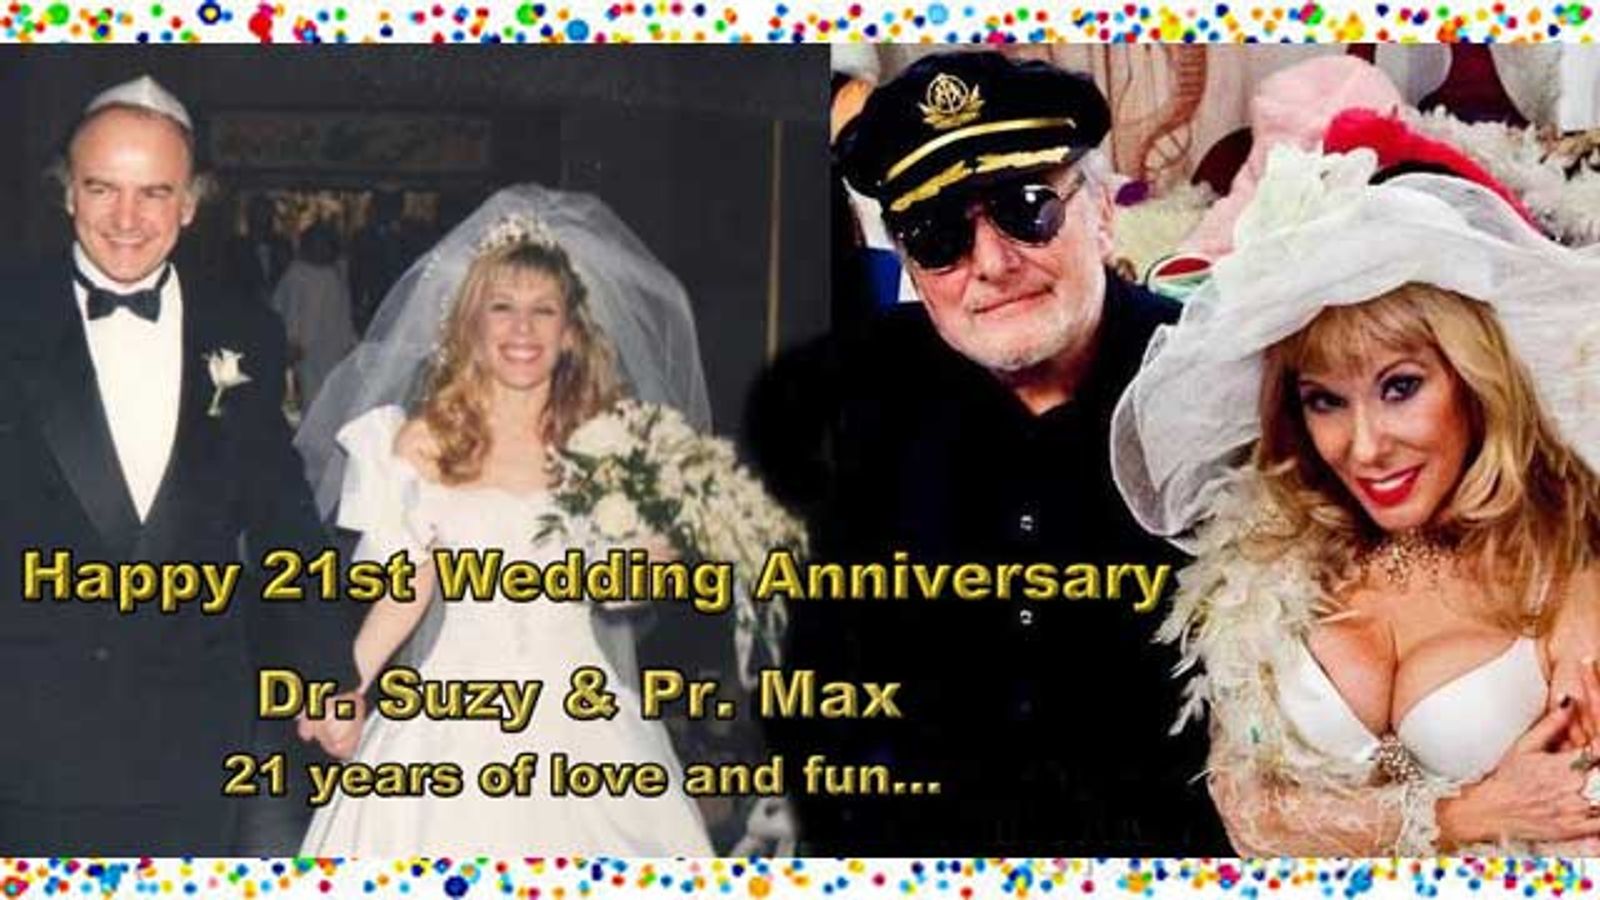 Dr. Suzy's 21st Wedding Anniversary on This Saturday's Show